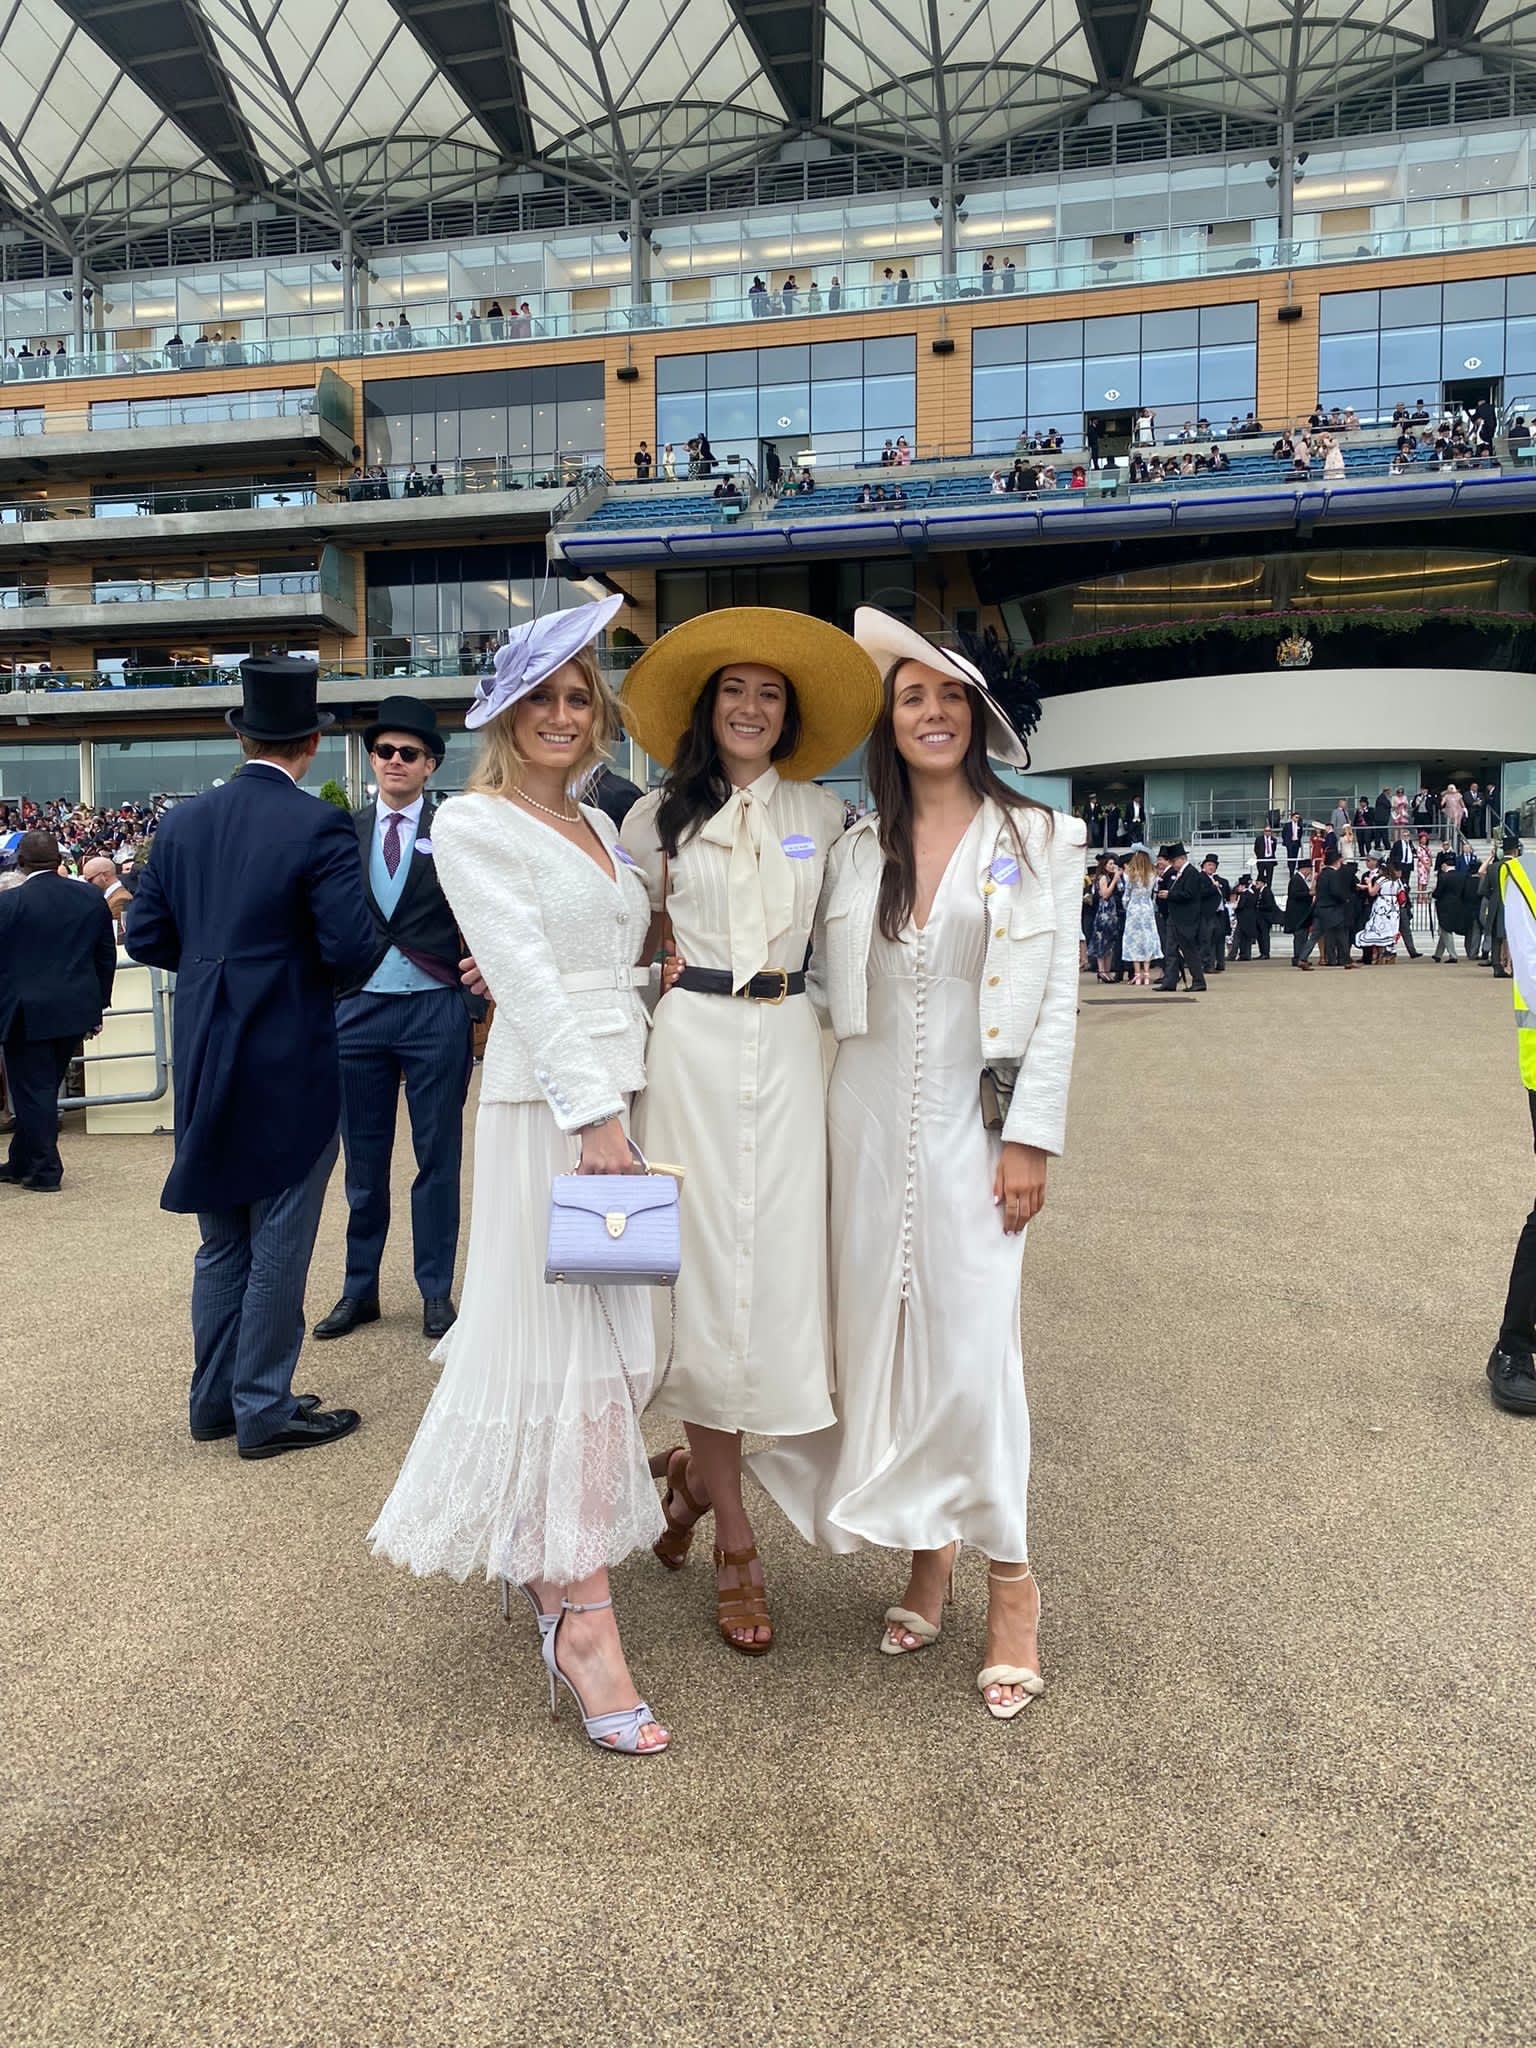 Madeleine Robinson Office Manager at Seat Unique with friends at Royal Ascot